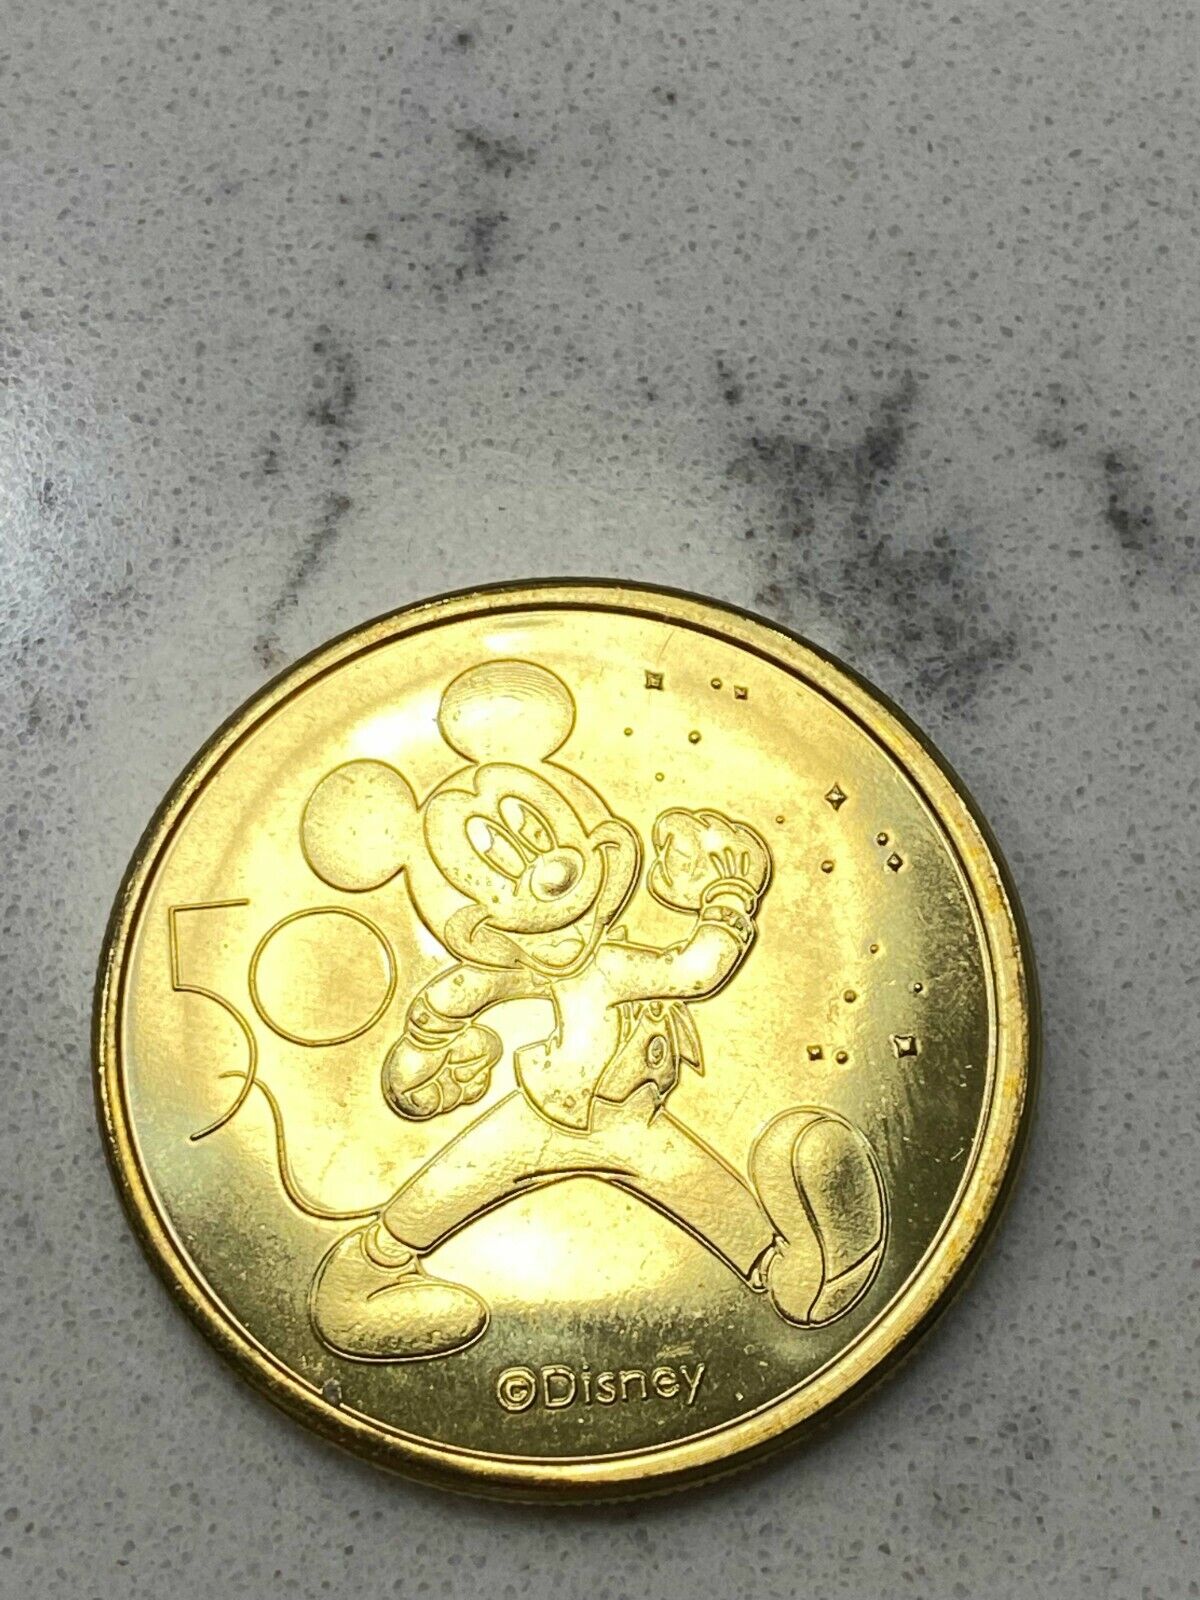 Disney Parks SOLD OUT Disney World 50th Anniversary Golden Medallion Coin WDW